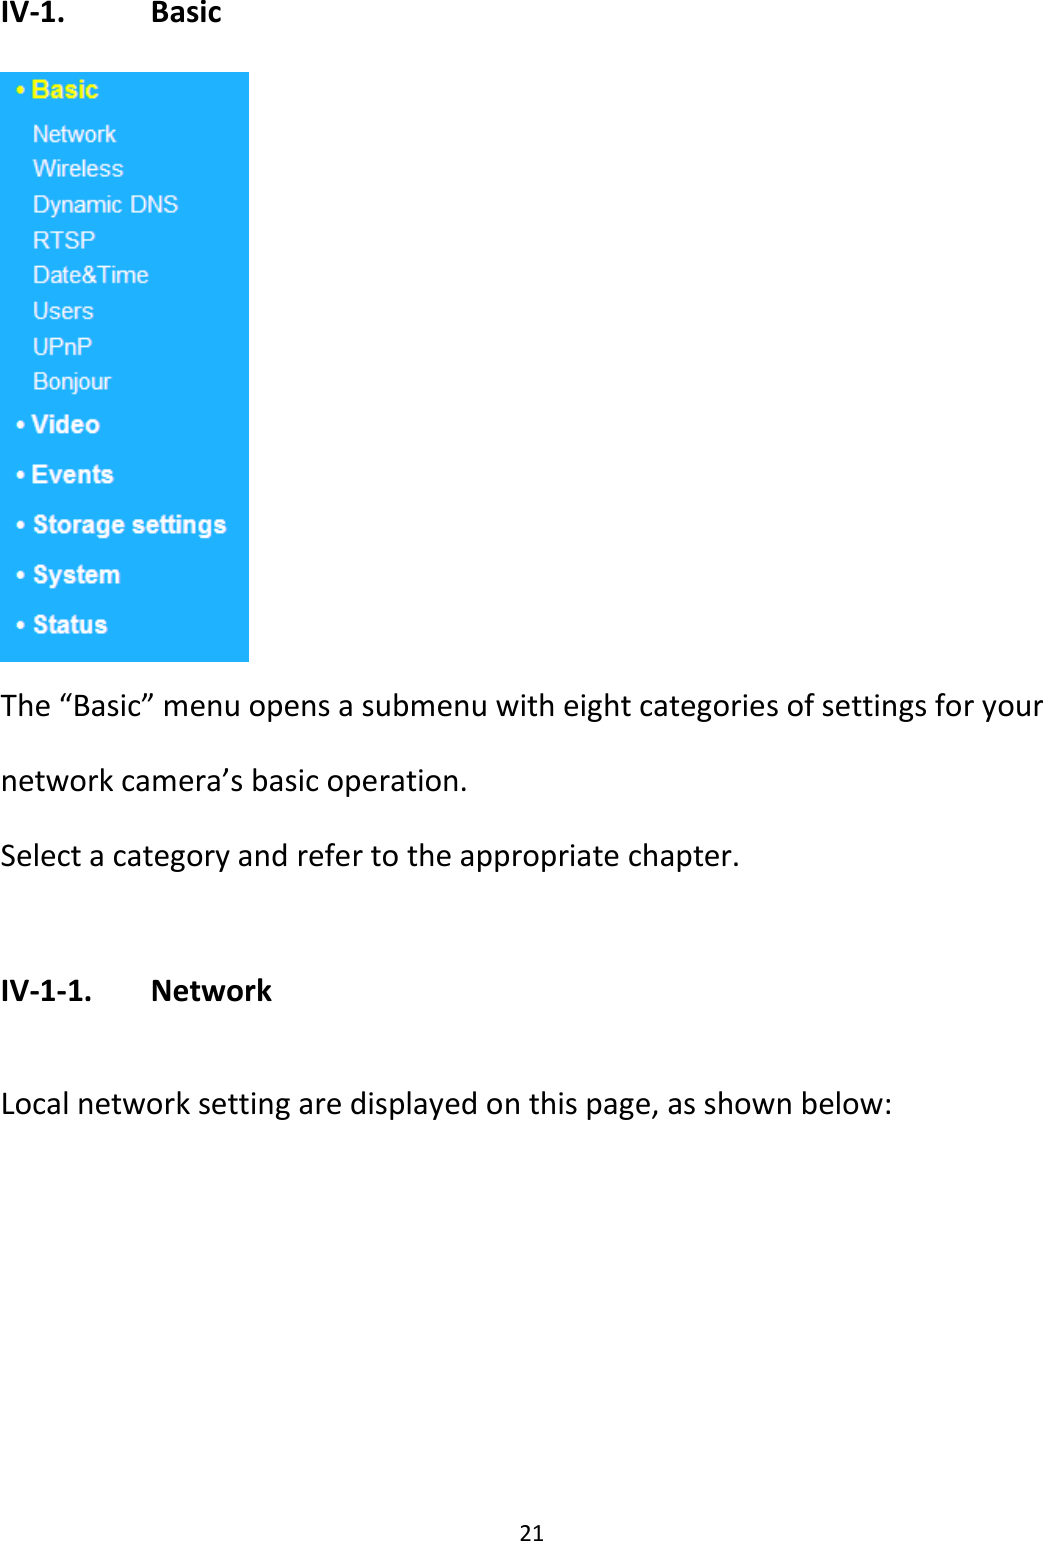 21  IV-1.    Basic   The “Basic” menu opens a submenu with eight categories of settings for your network camera’s basic operation.  Select a category and refer to the appropriate chapter.  IV-1-1.   Network  Local network setting are displayed on this page, as shown below: 